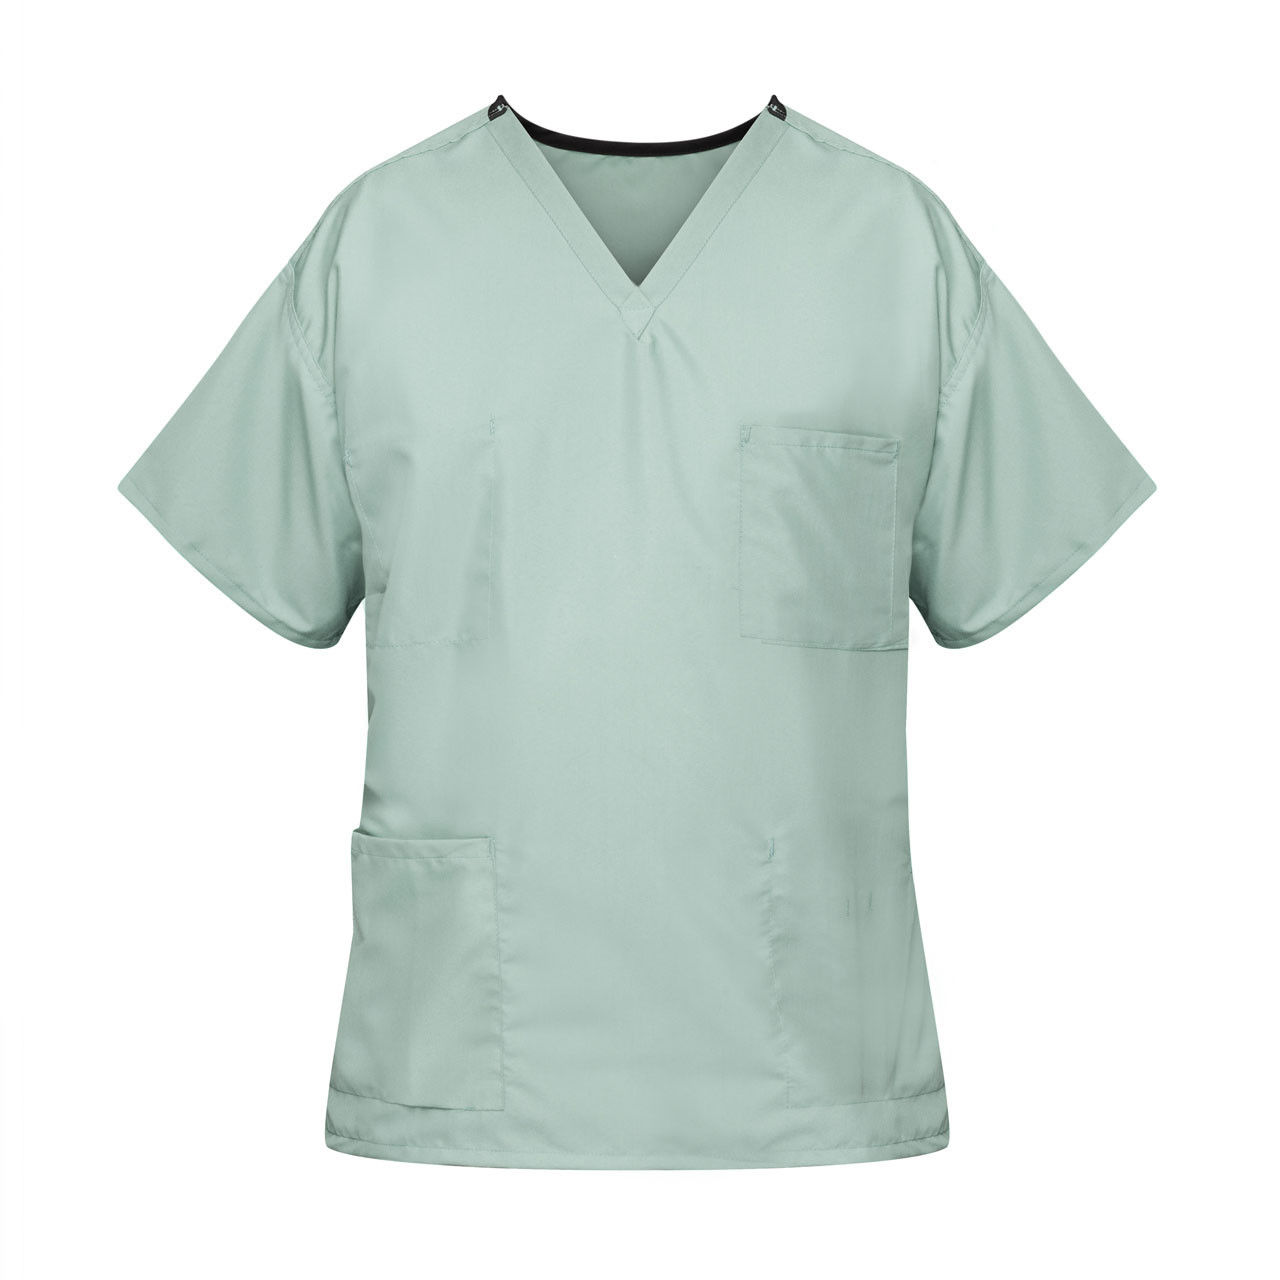 What is the location of the front pocket on the misty green scrub tops?